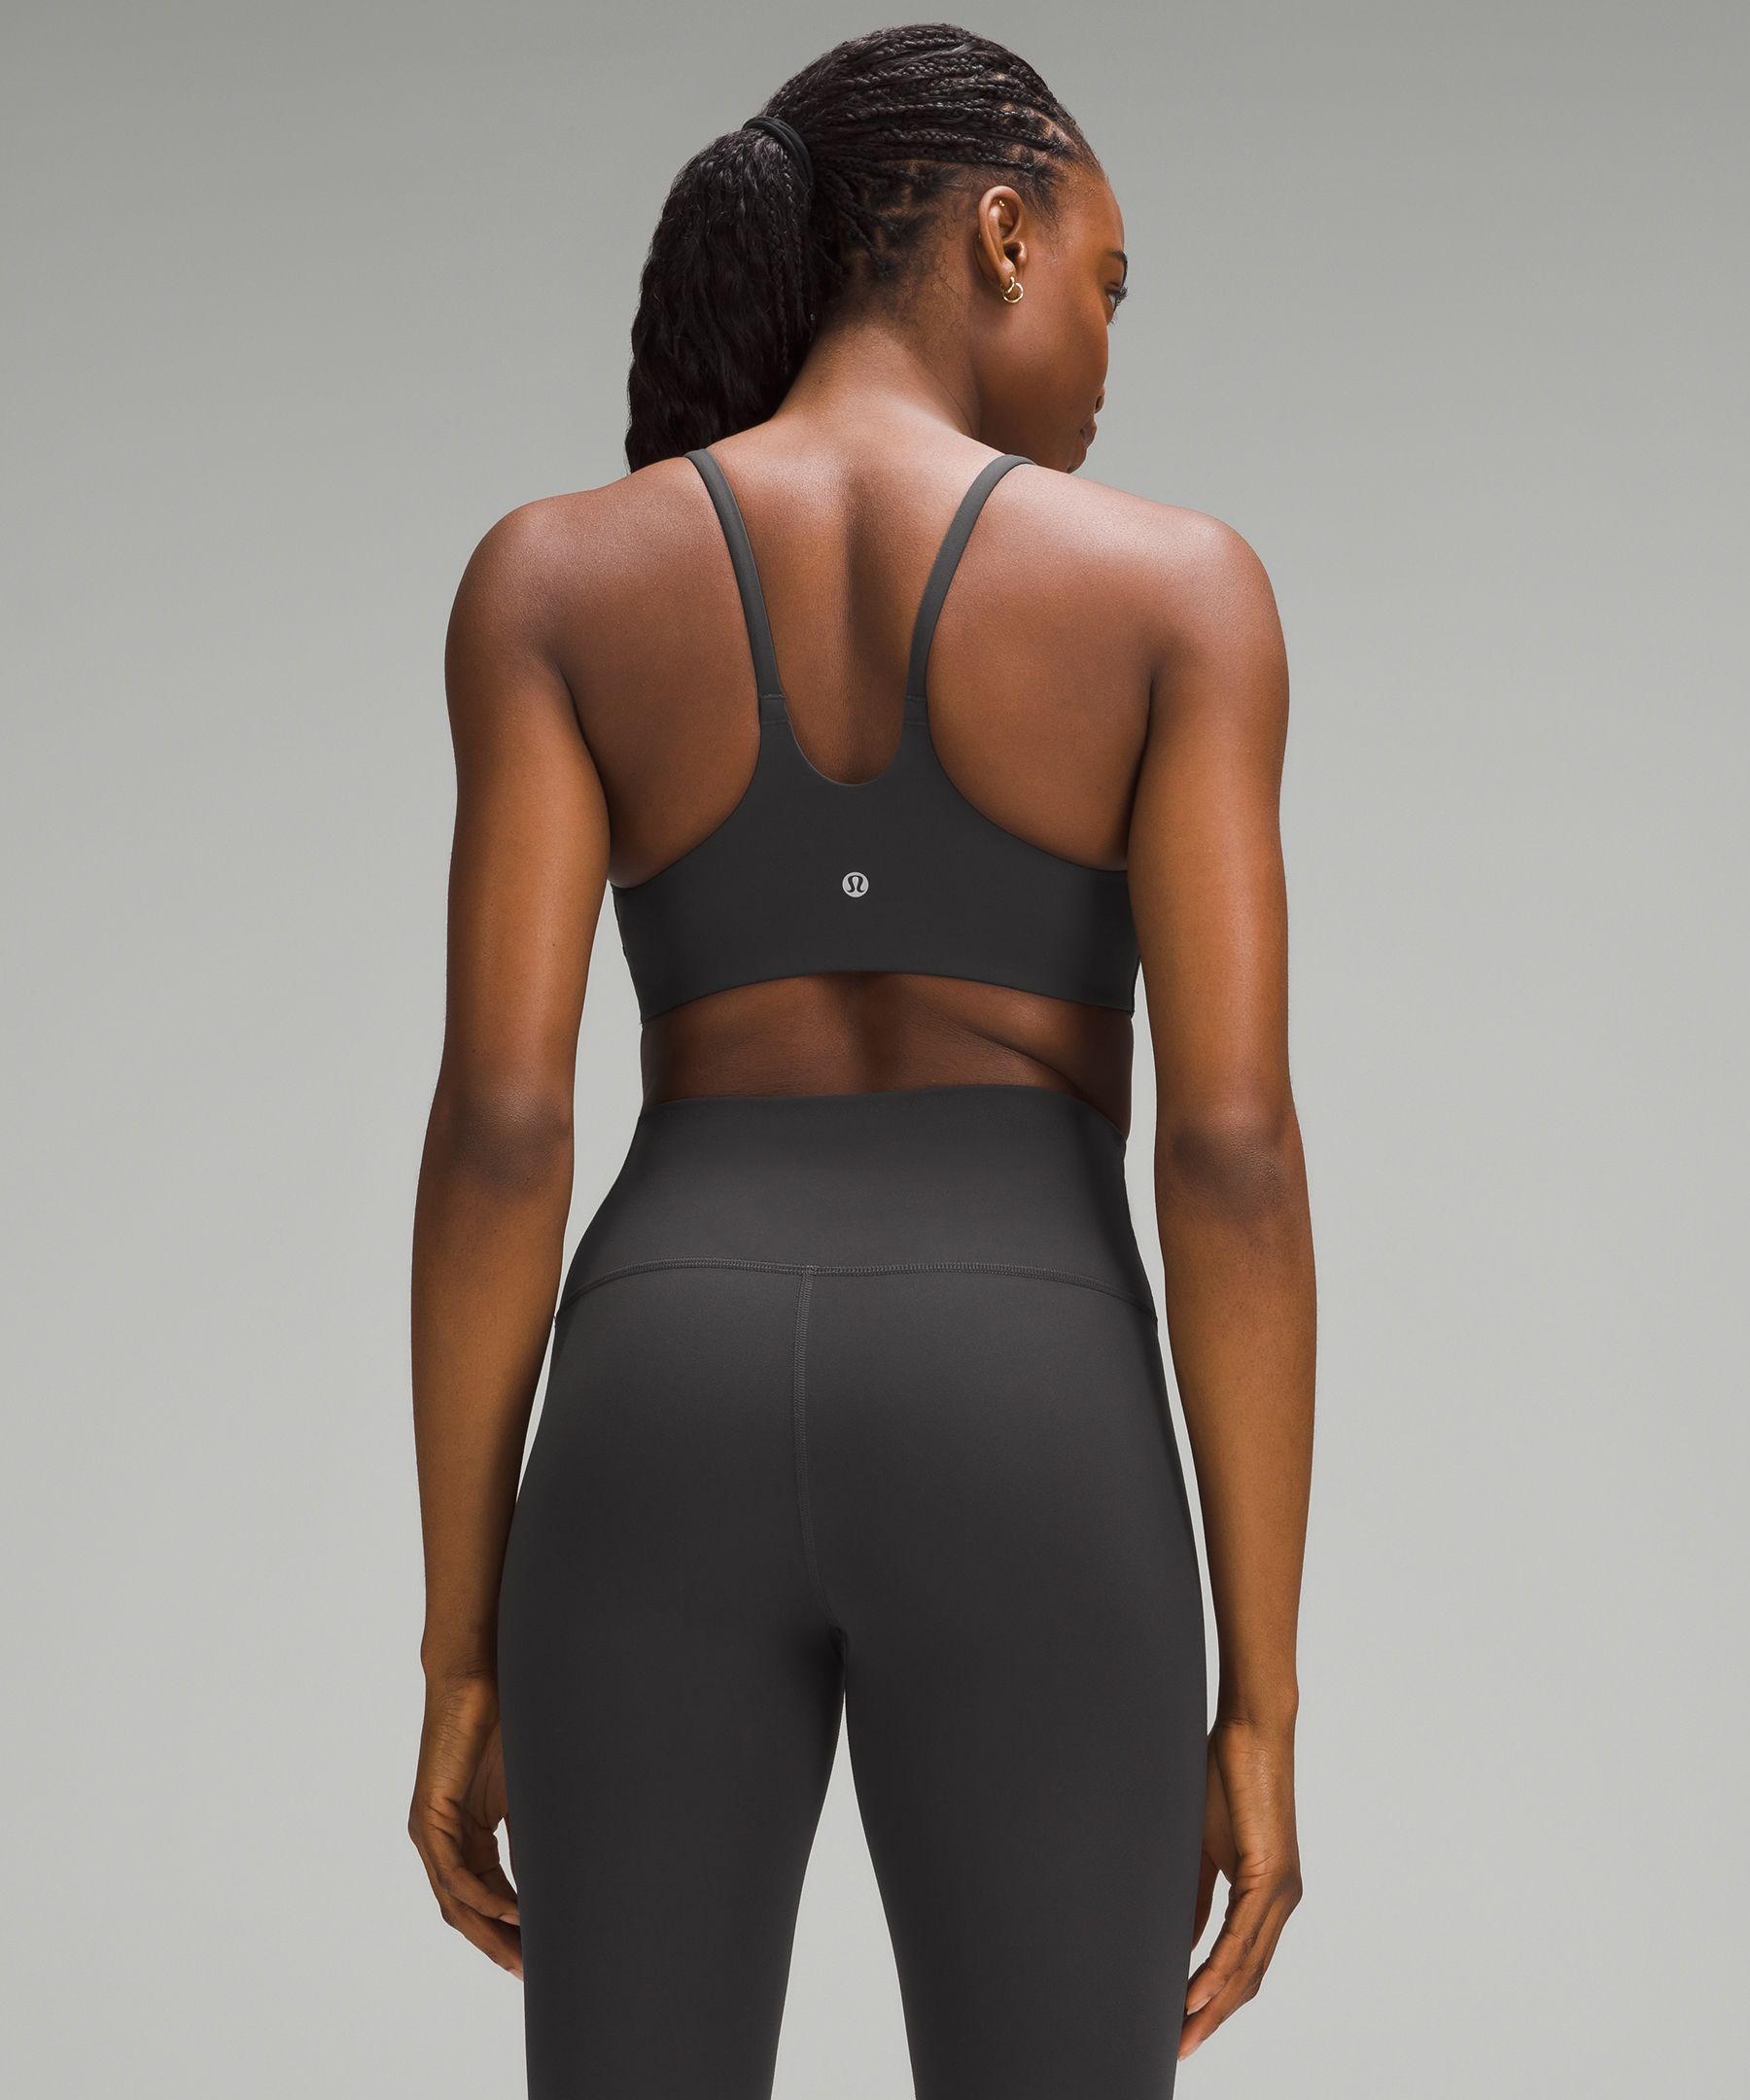 lululemon - This medium-support strappy bra is made to fit like a